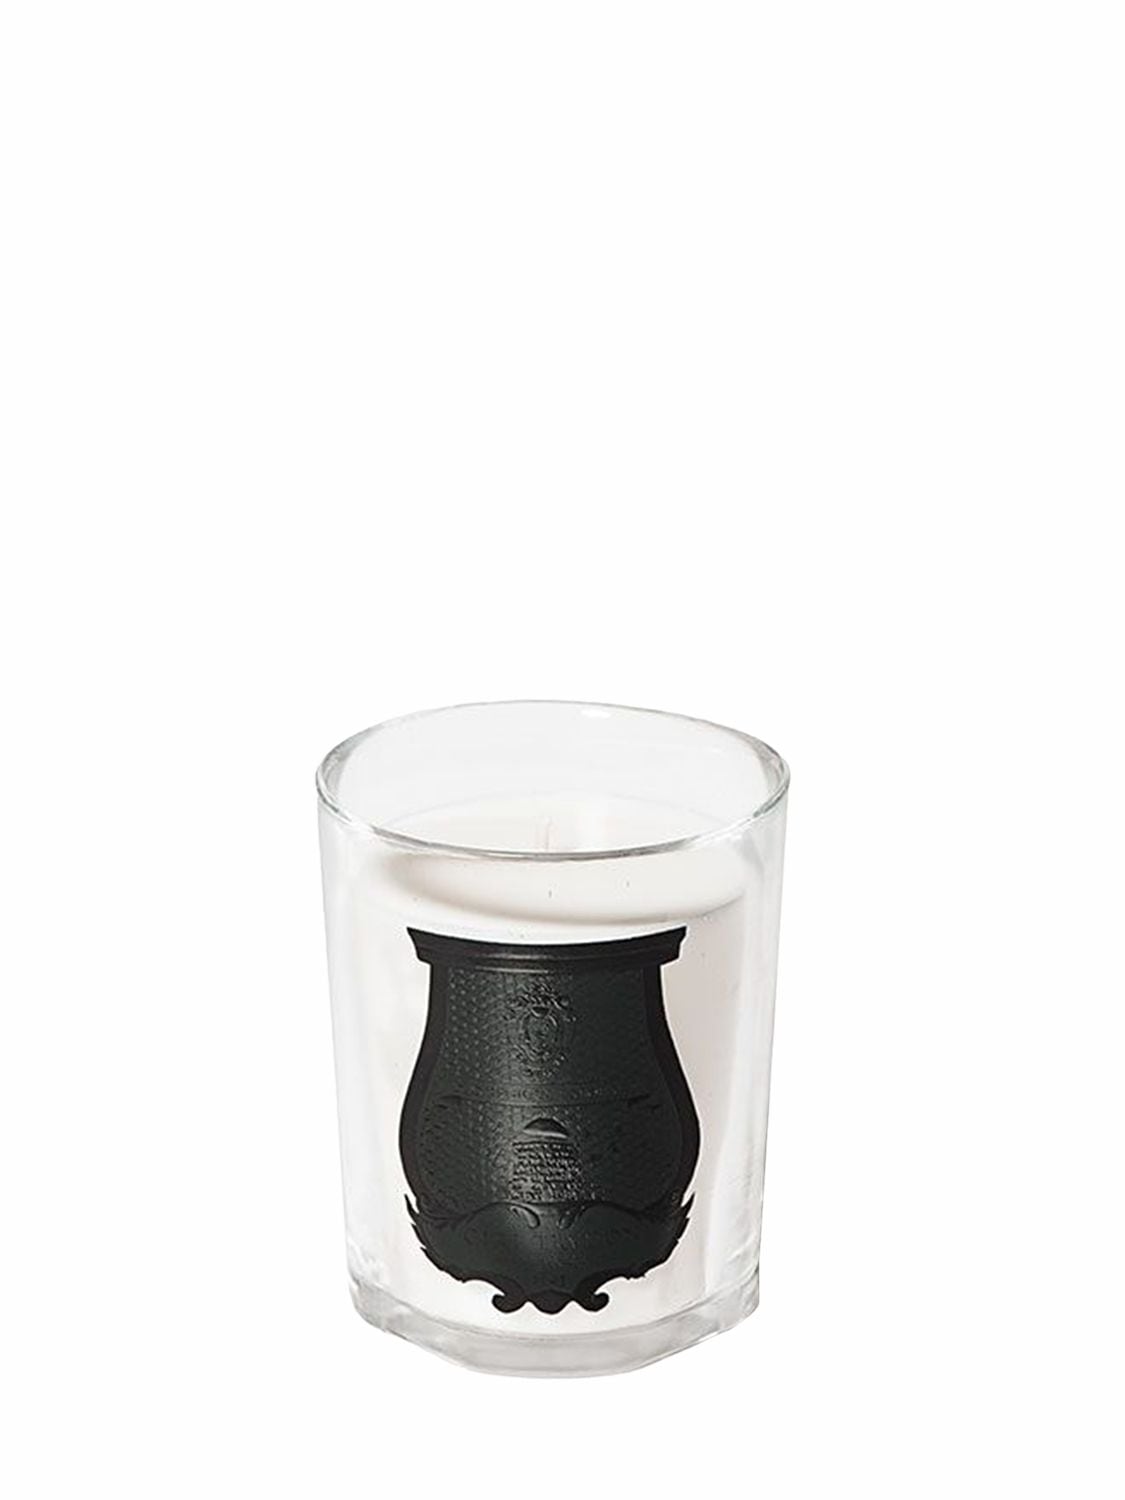 Trudon Rose Poivrée Special Edition Candle In White